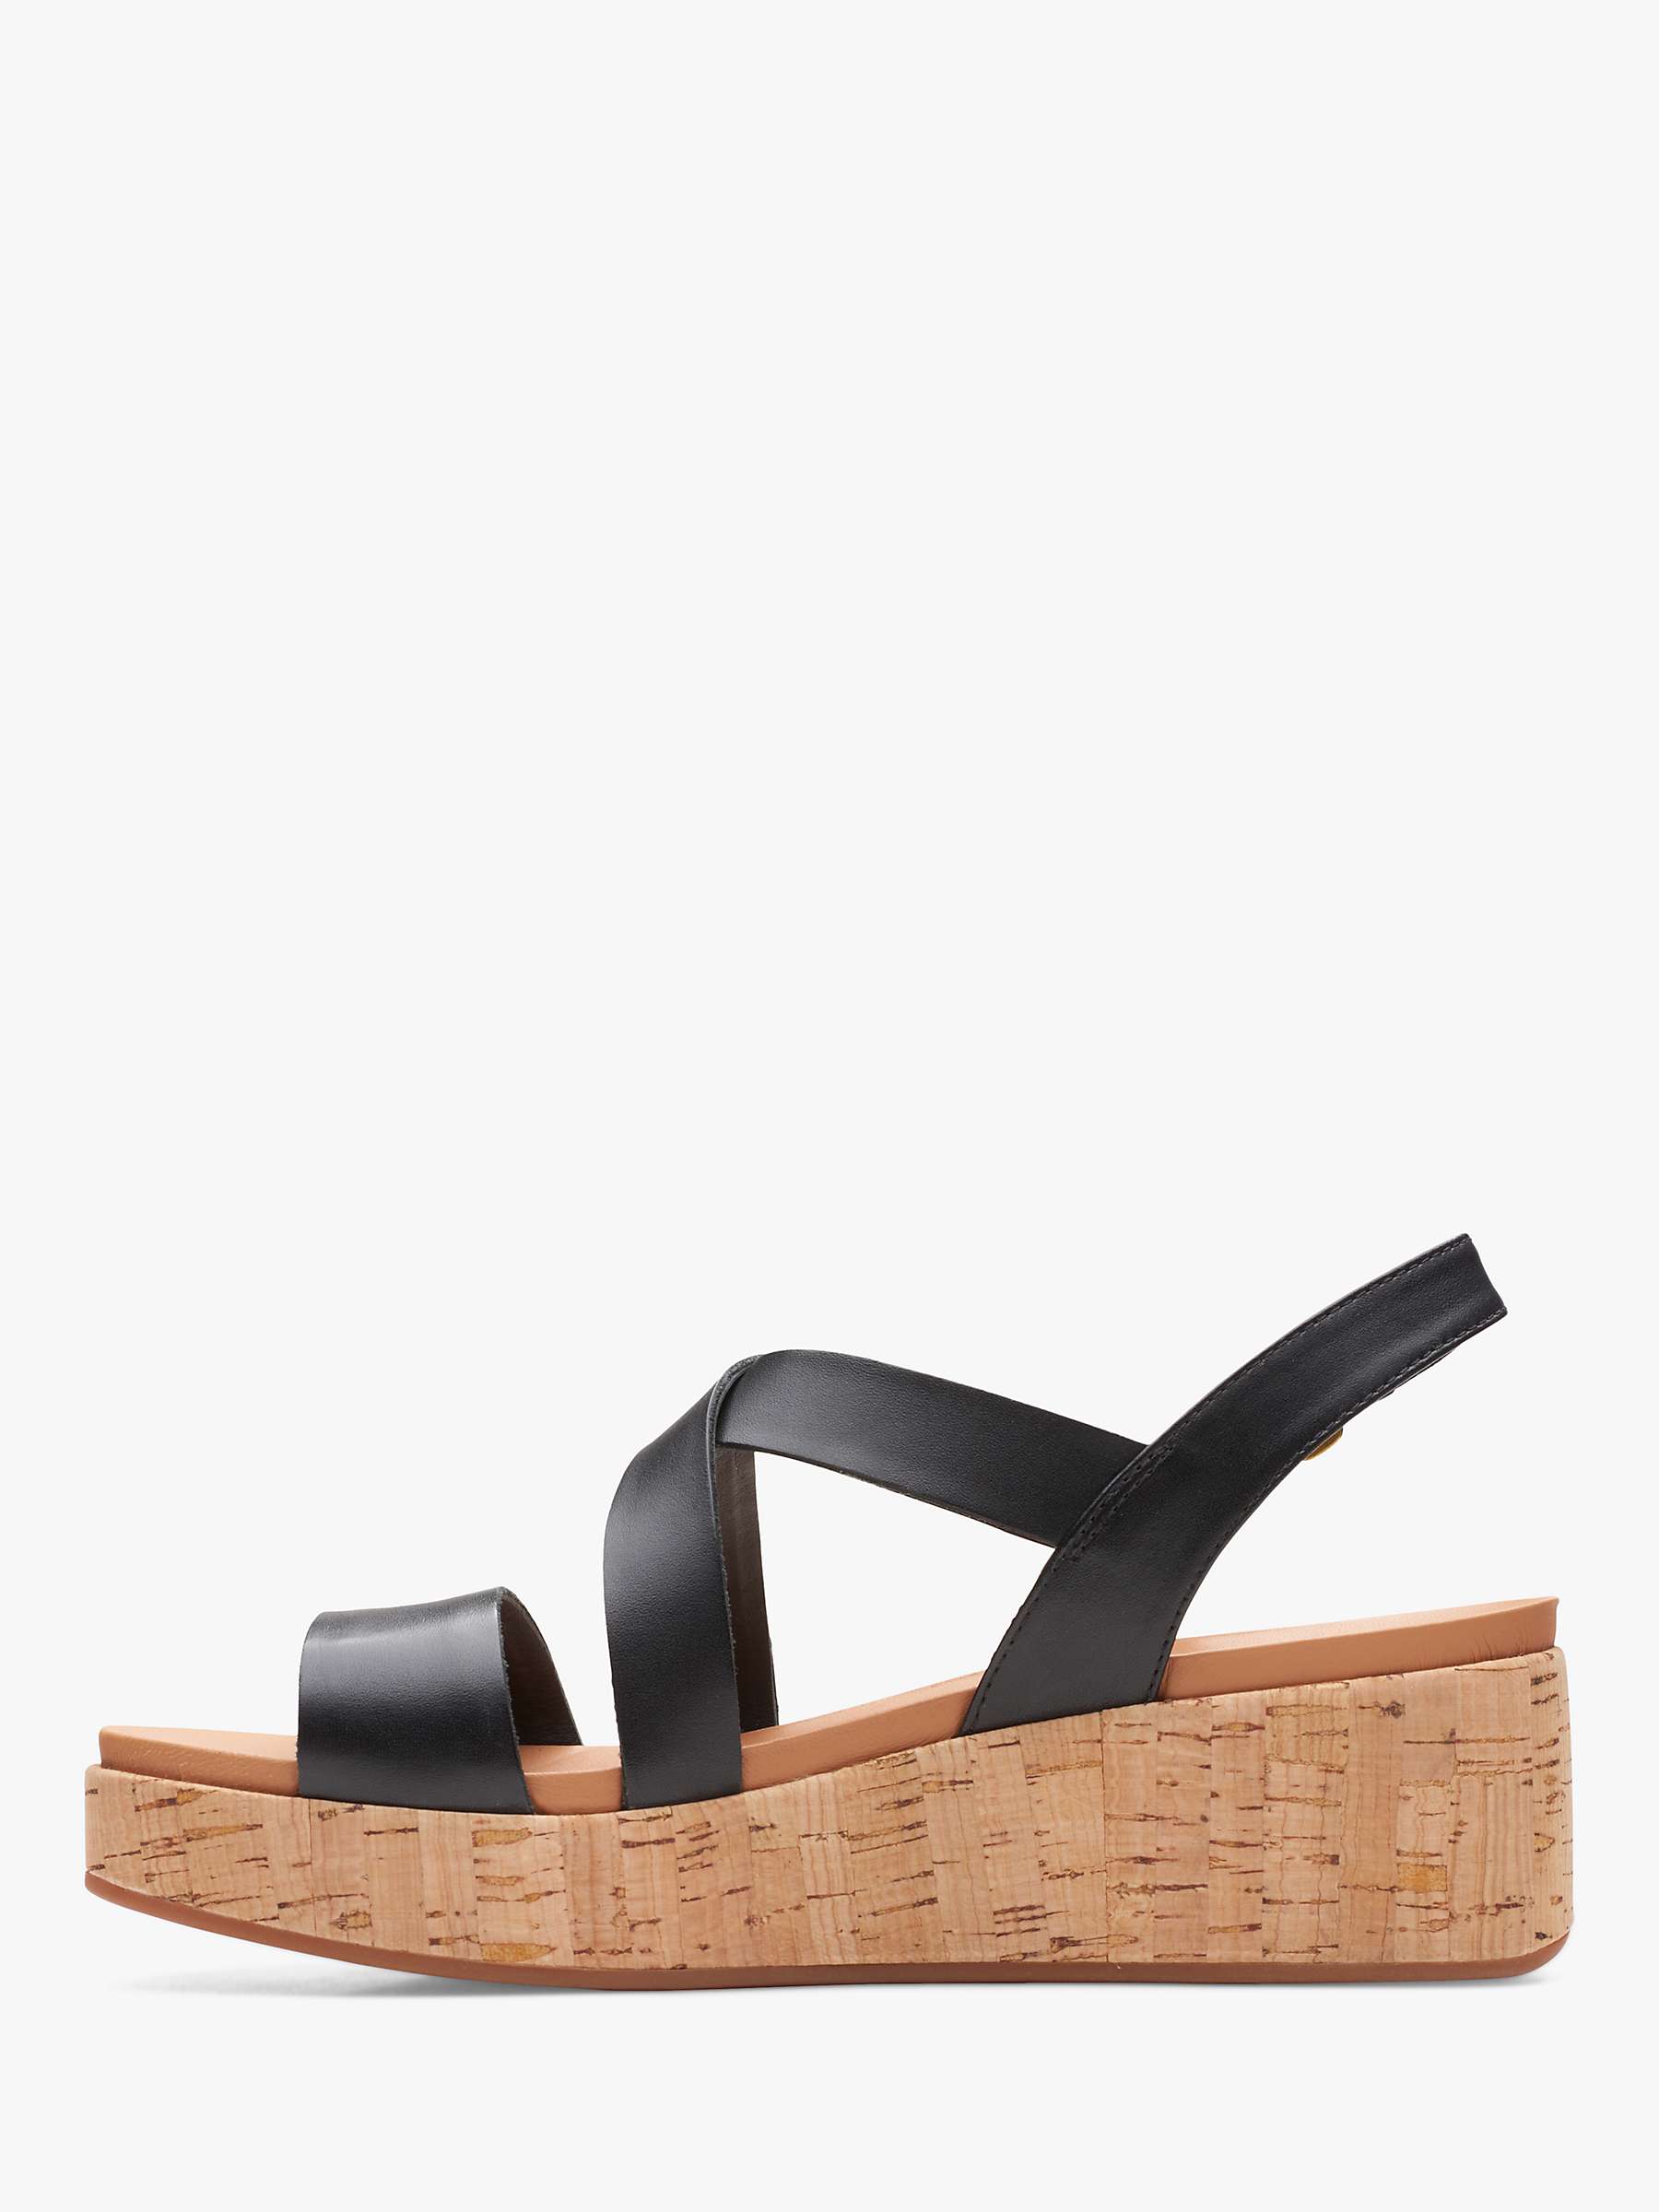 Clarks Kimmei Cork Leather Wedge Sandals, Black at John Lewis & Partners